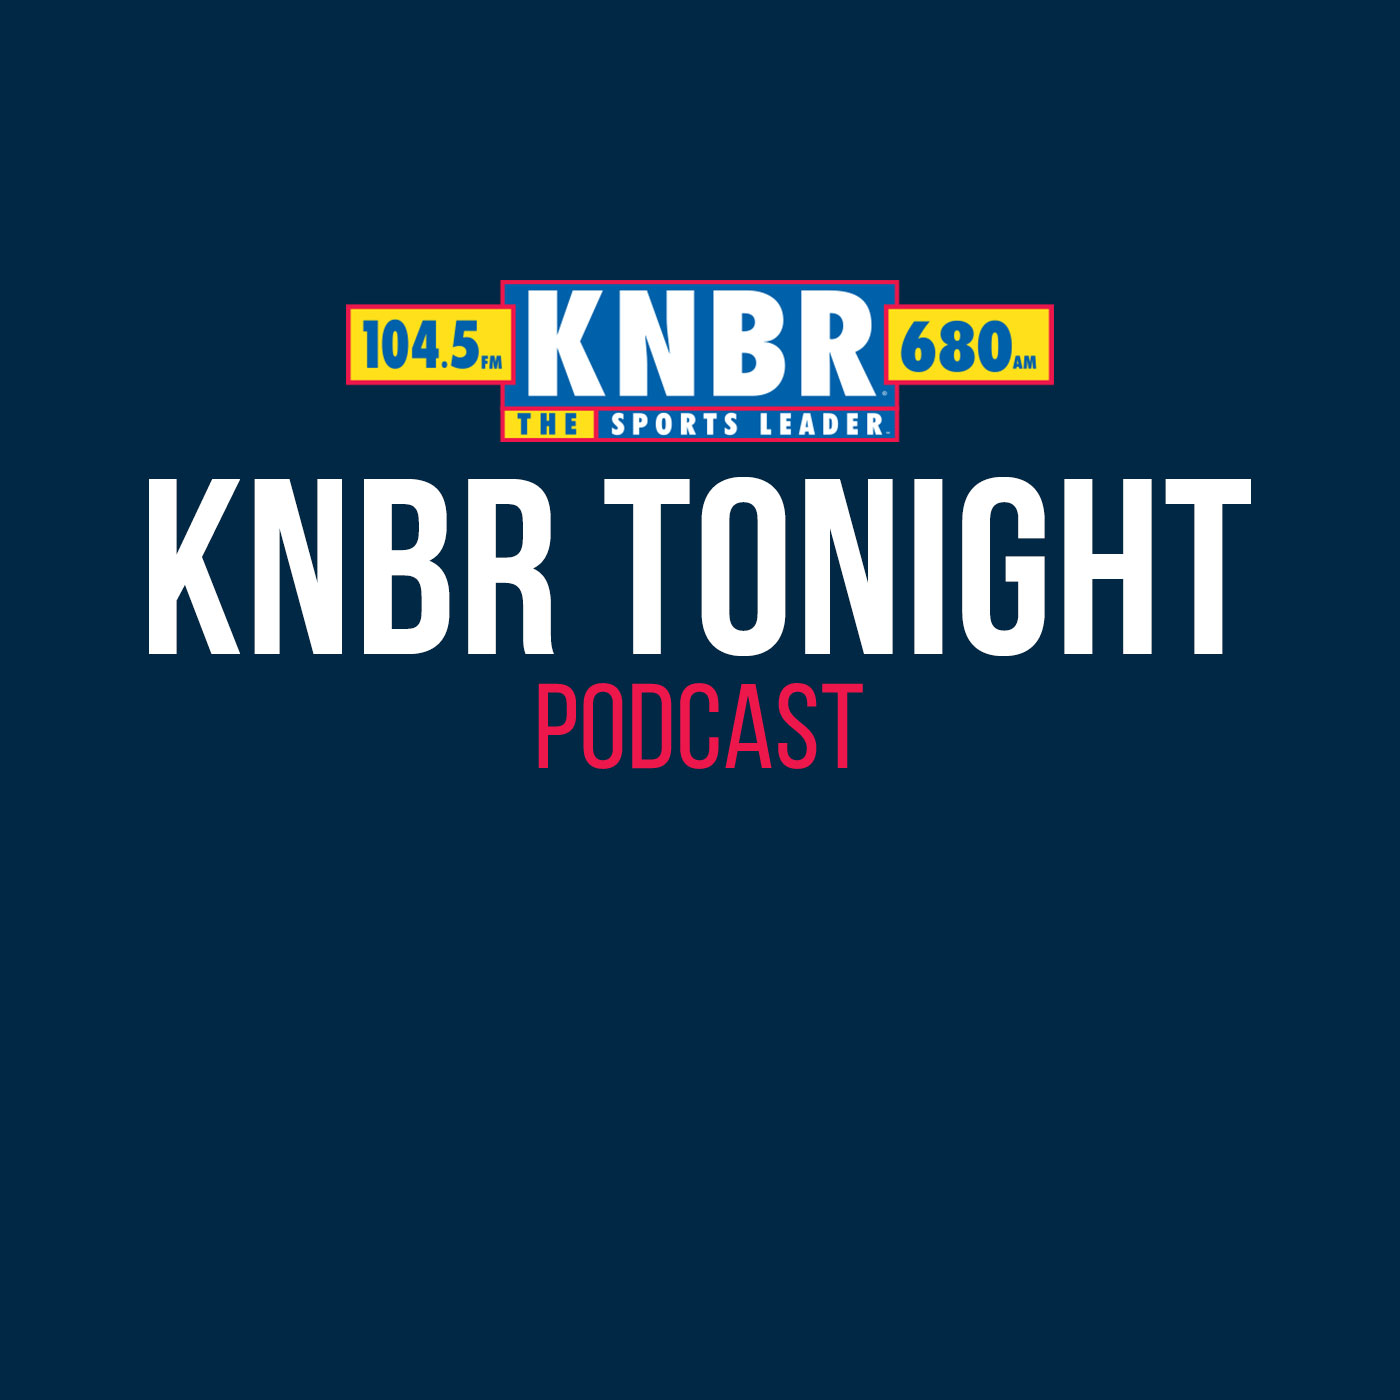 10-25 John Shea joins KNBR Tonight with Kerry Crowley to preview the World Series and Dusty Baker restoring the Houston Astros franchise following the sign stealing scandal and now having a chance at earning his first ring